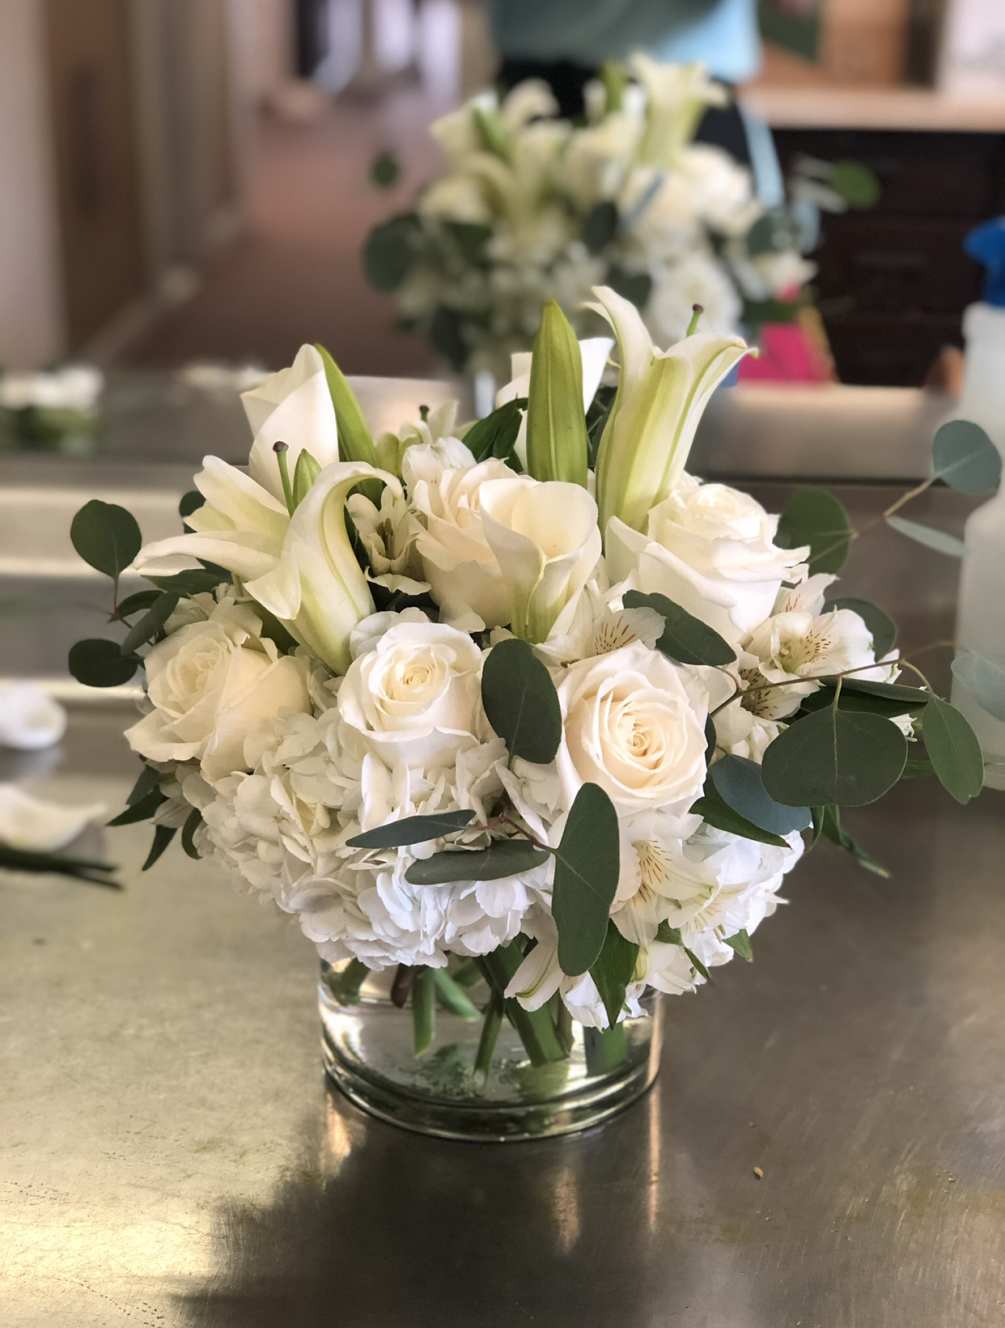 All white flowers in a cylinder vase 
roses, lilies, hydrangeas